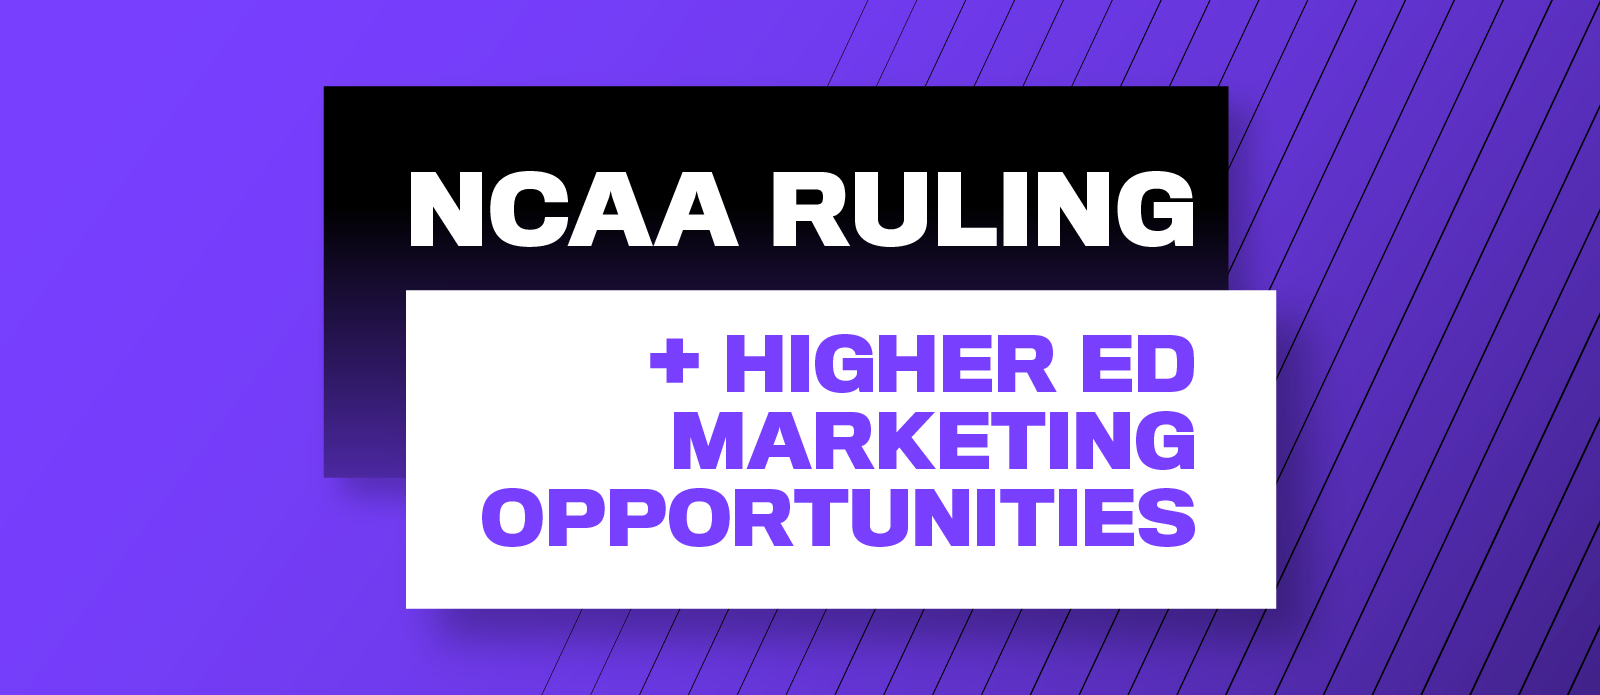 NCAA Ruling Presents Opportunities for Higher Ed Marketers